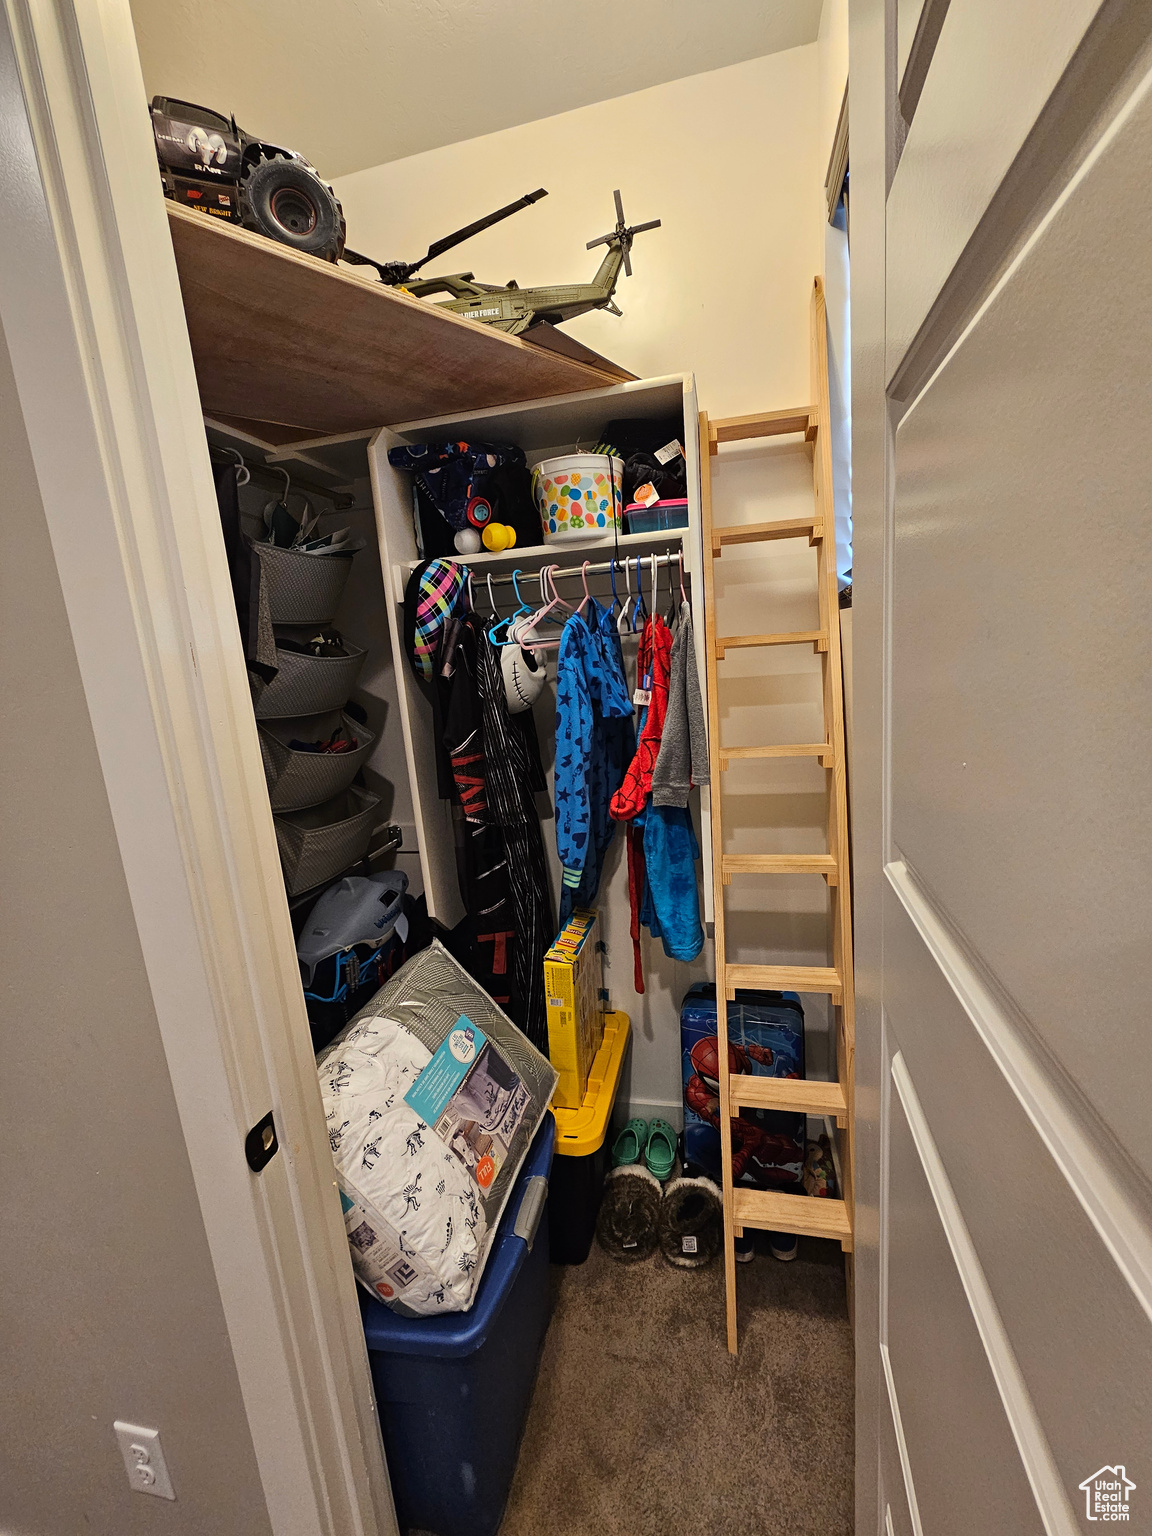 Walk in closet in bedroom 1 on main level. Stairs to a good hiding spot for kids.